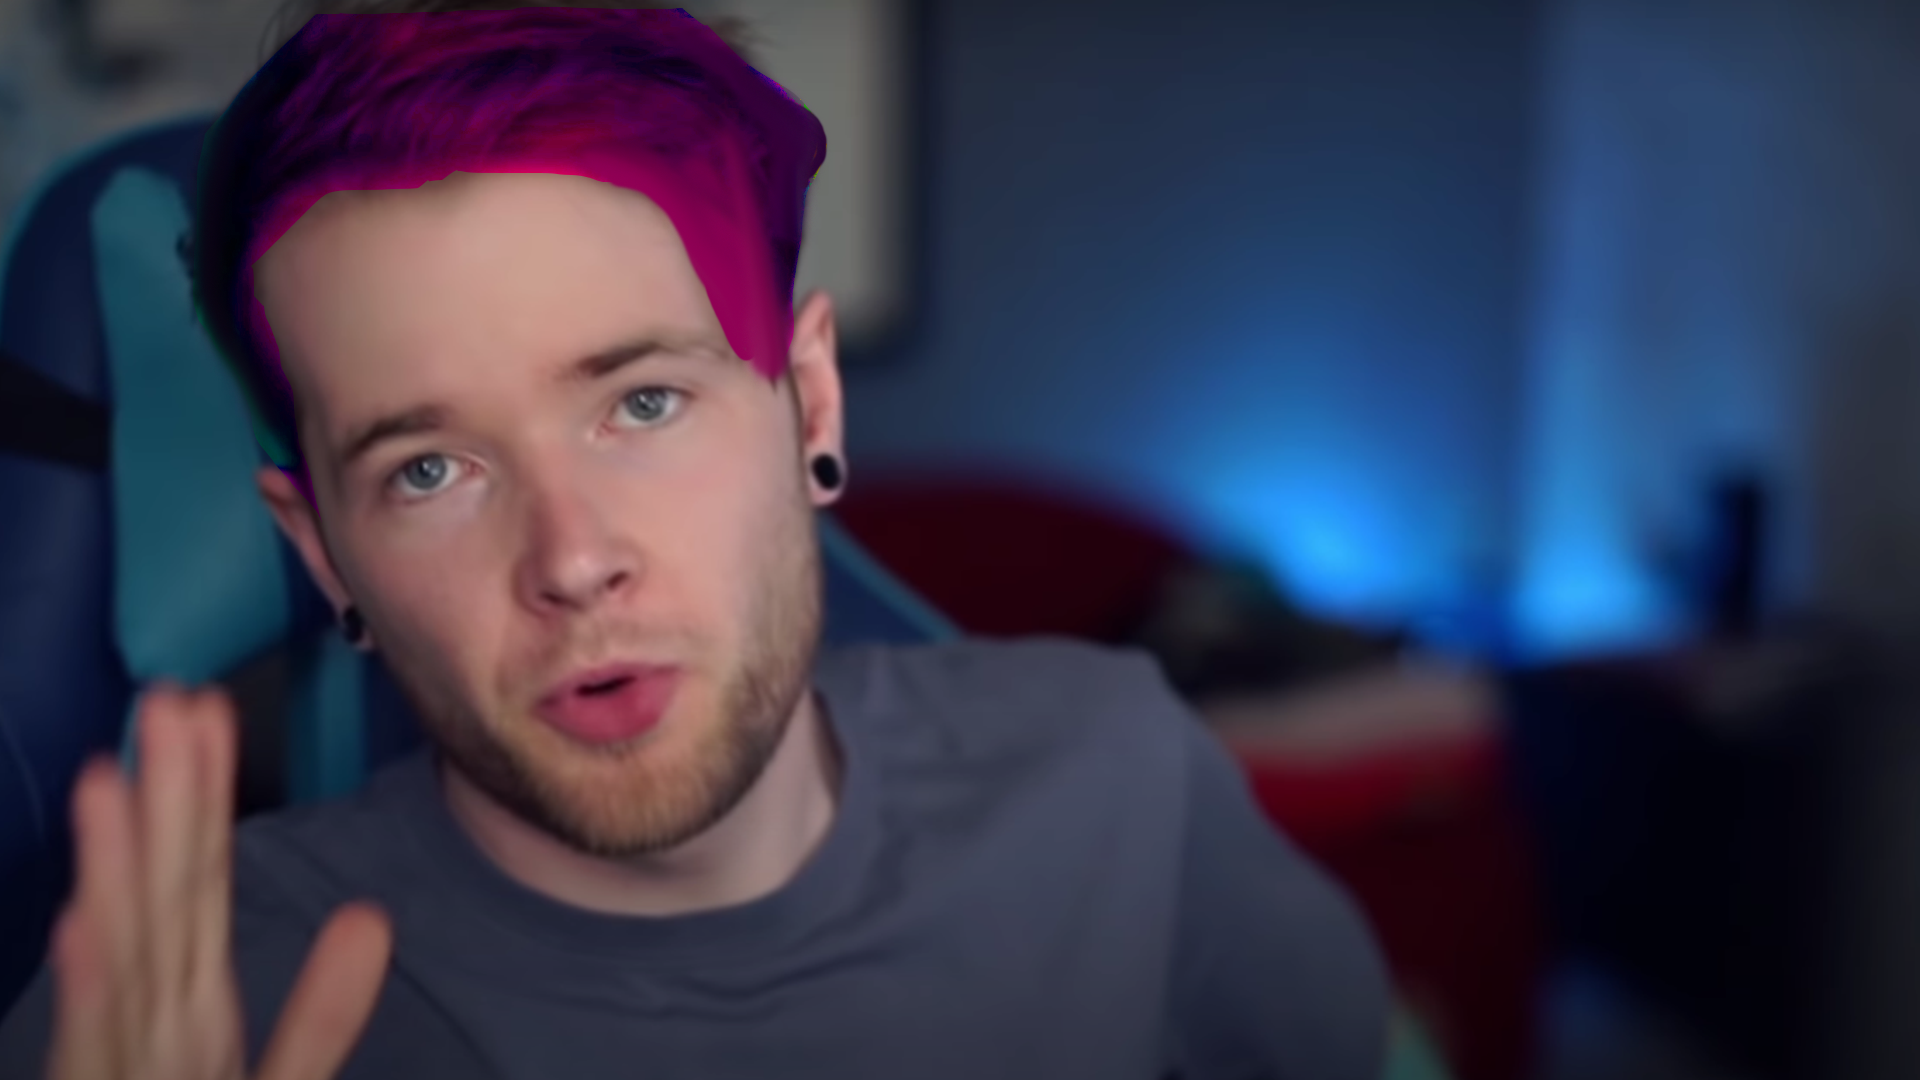 7. Dantdm's Blue and Pink Hair Cosplay - wide 2